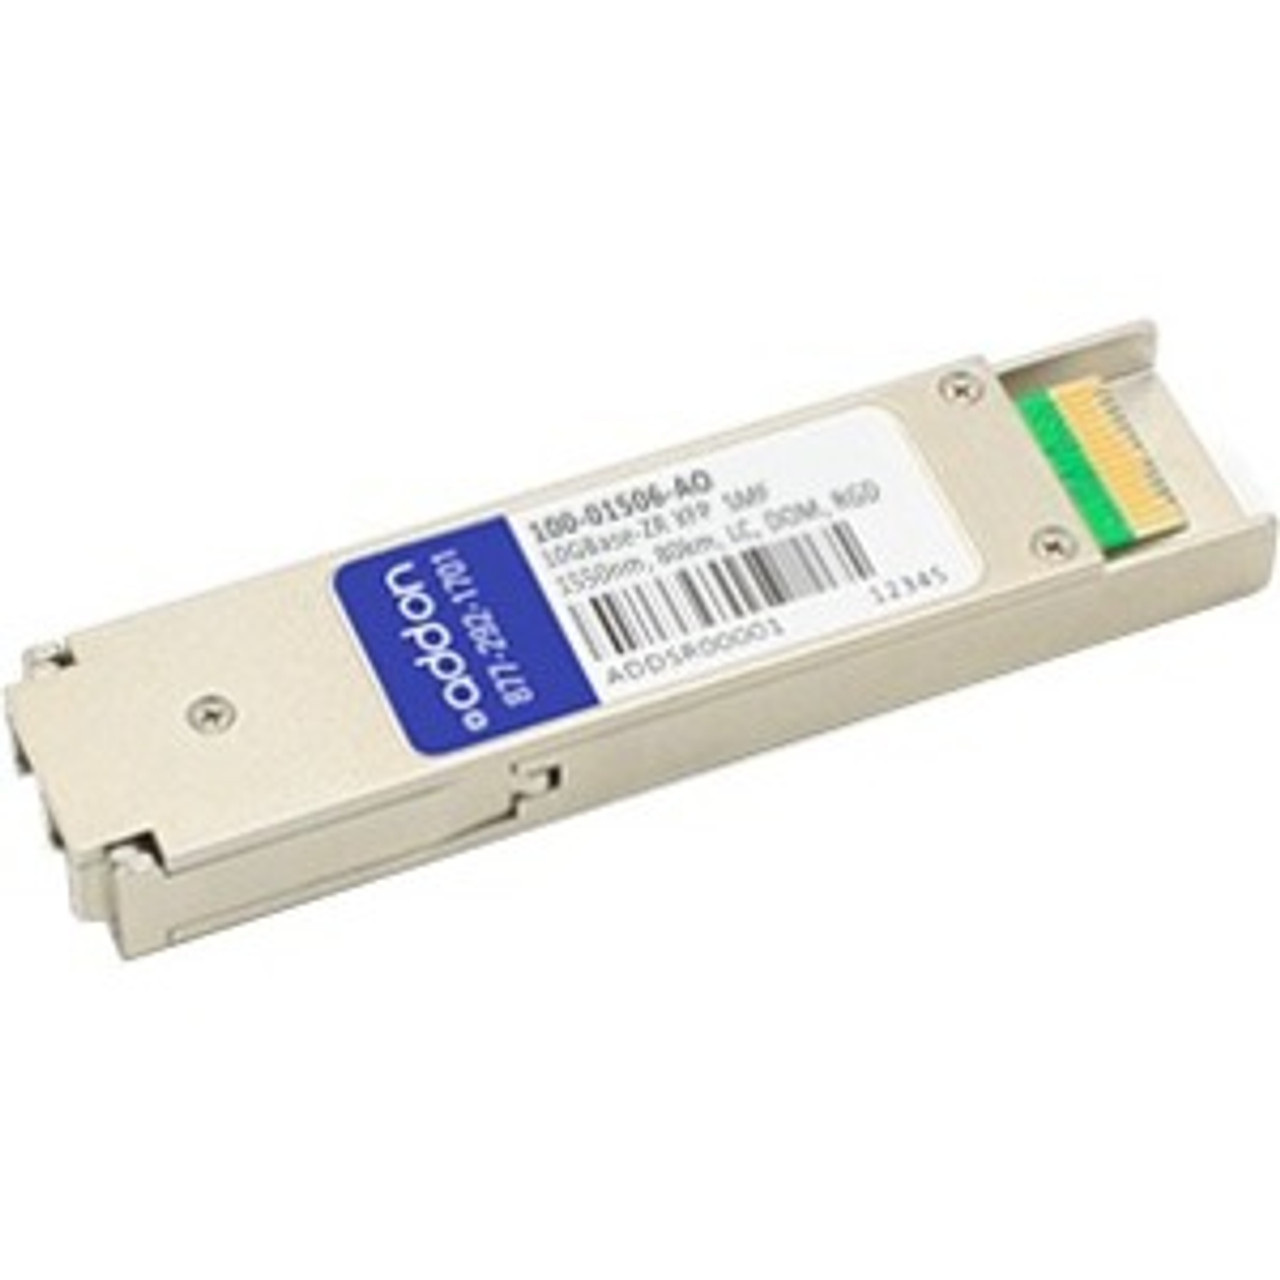 100-01506-AO AddOn 10Gbps 10GBase-ZR OC-192/STM-64 Single-mode Fiber 80km 1550nm Duplex LC Connector XFP Transceiver Module for Calix Compatible